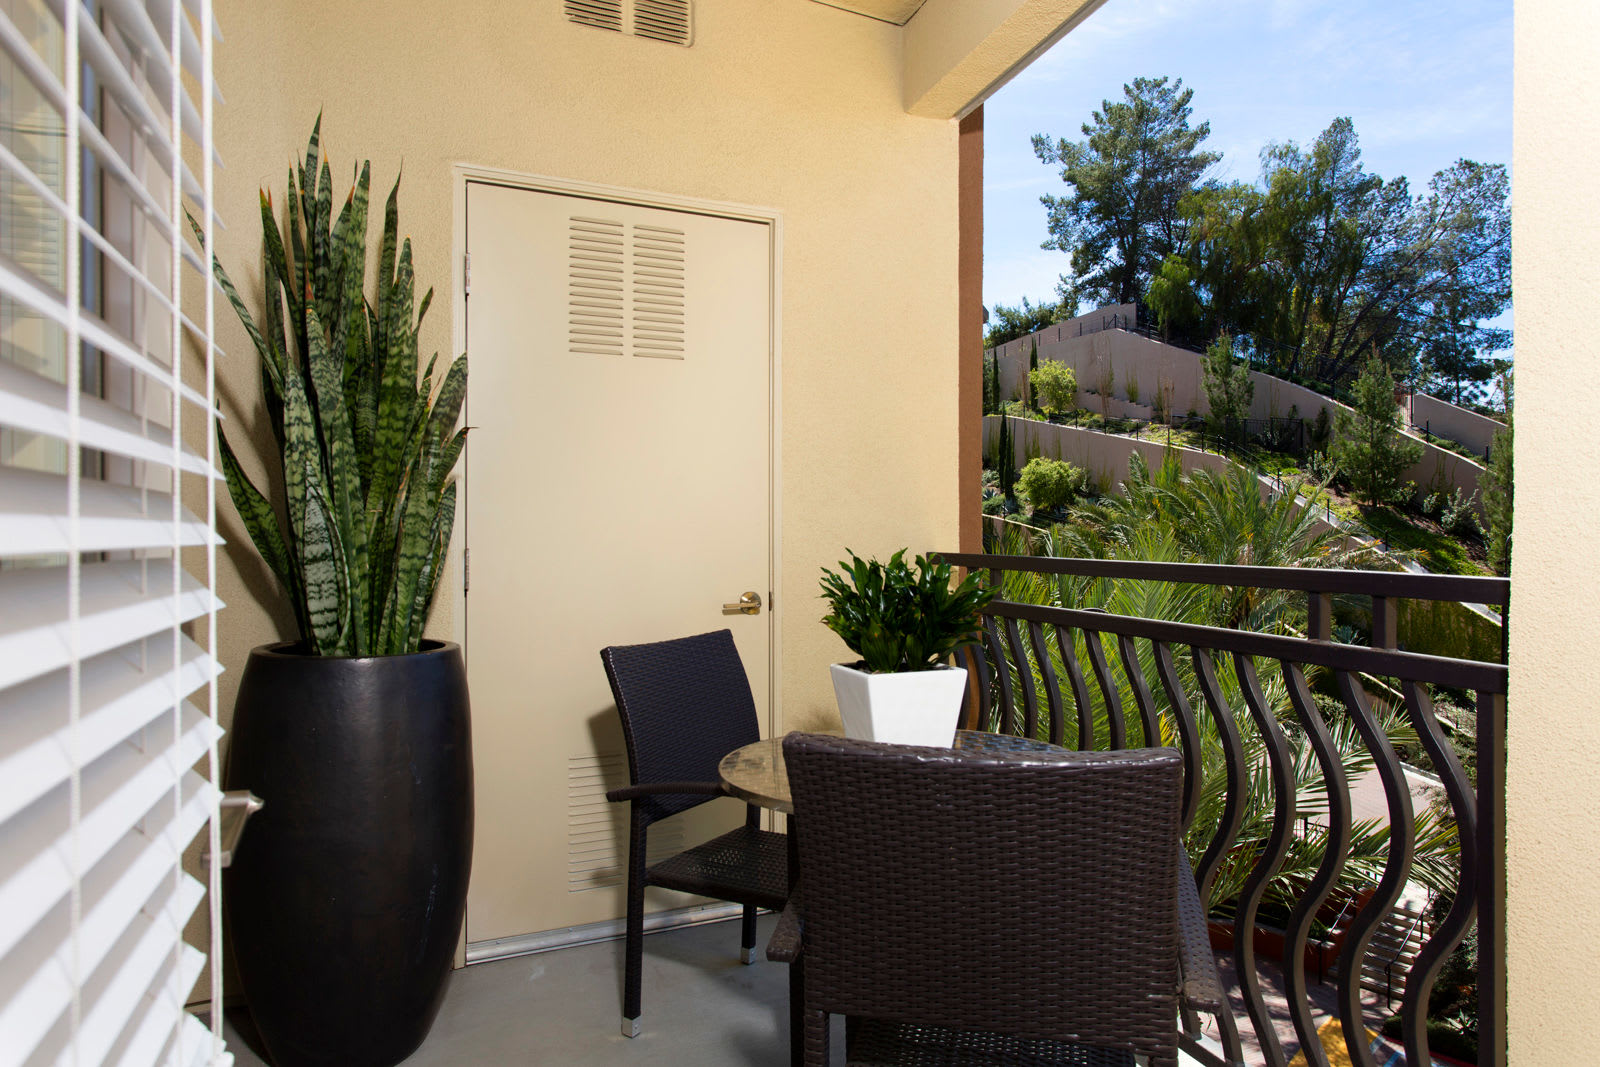 Private balcony at The Boulevard Apartment Homes in Woodland Hills, California